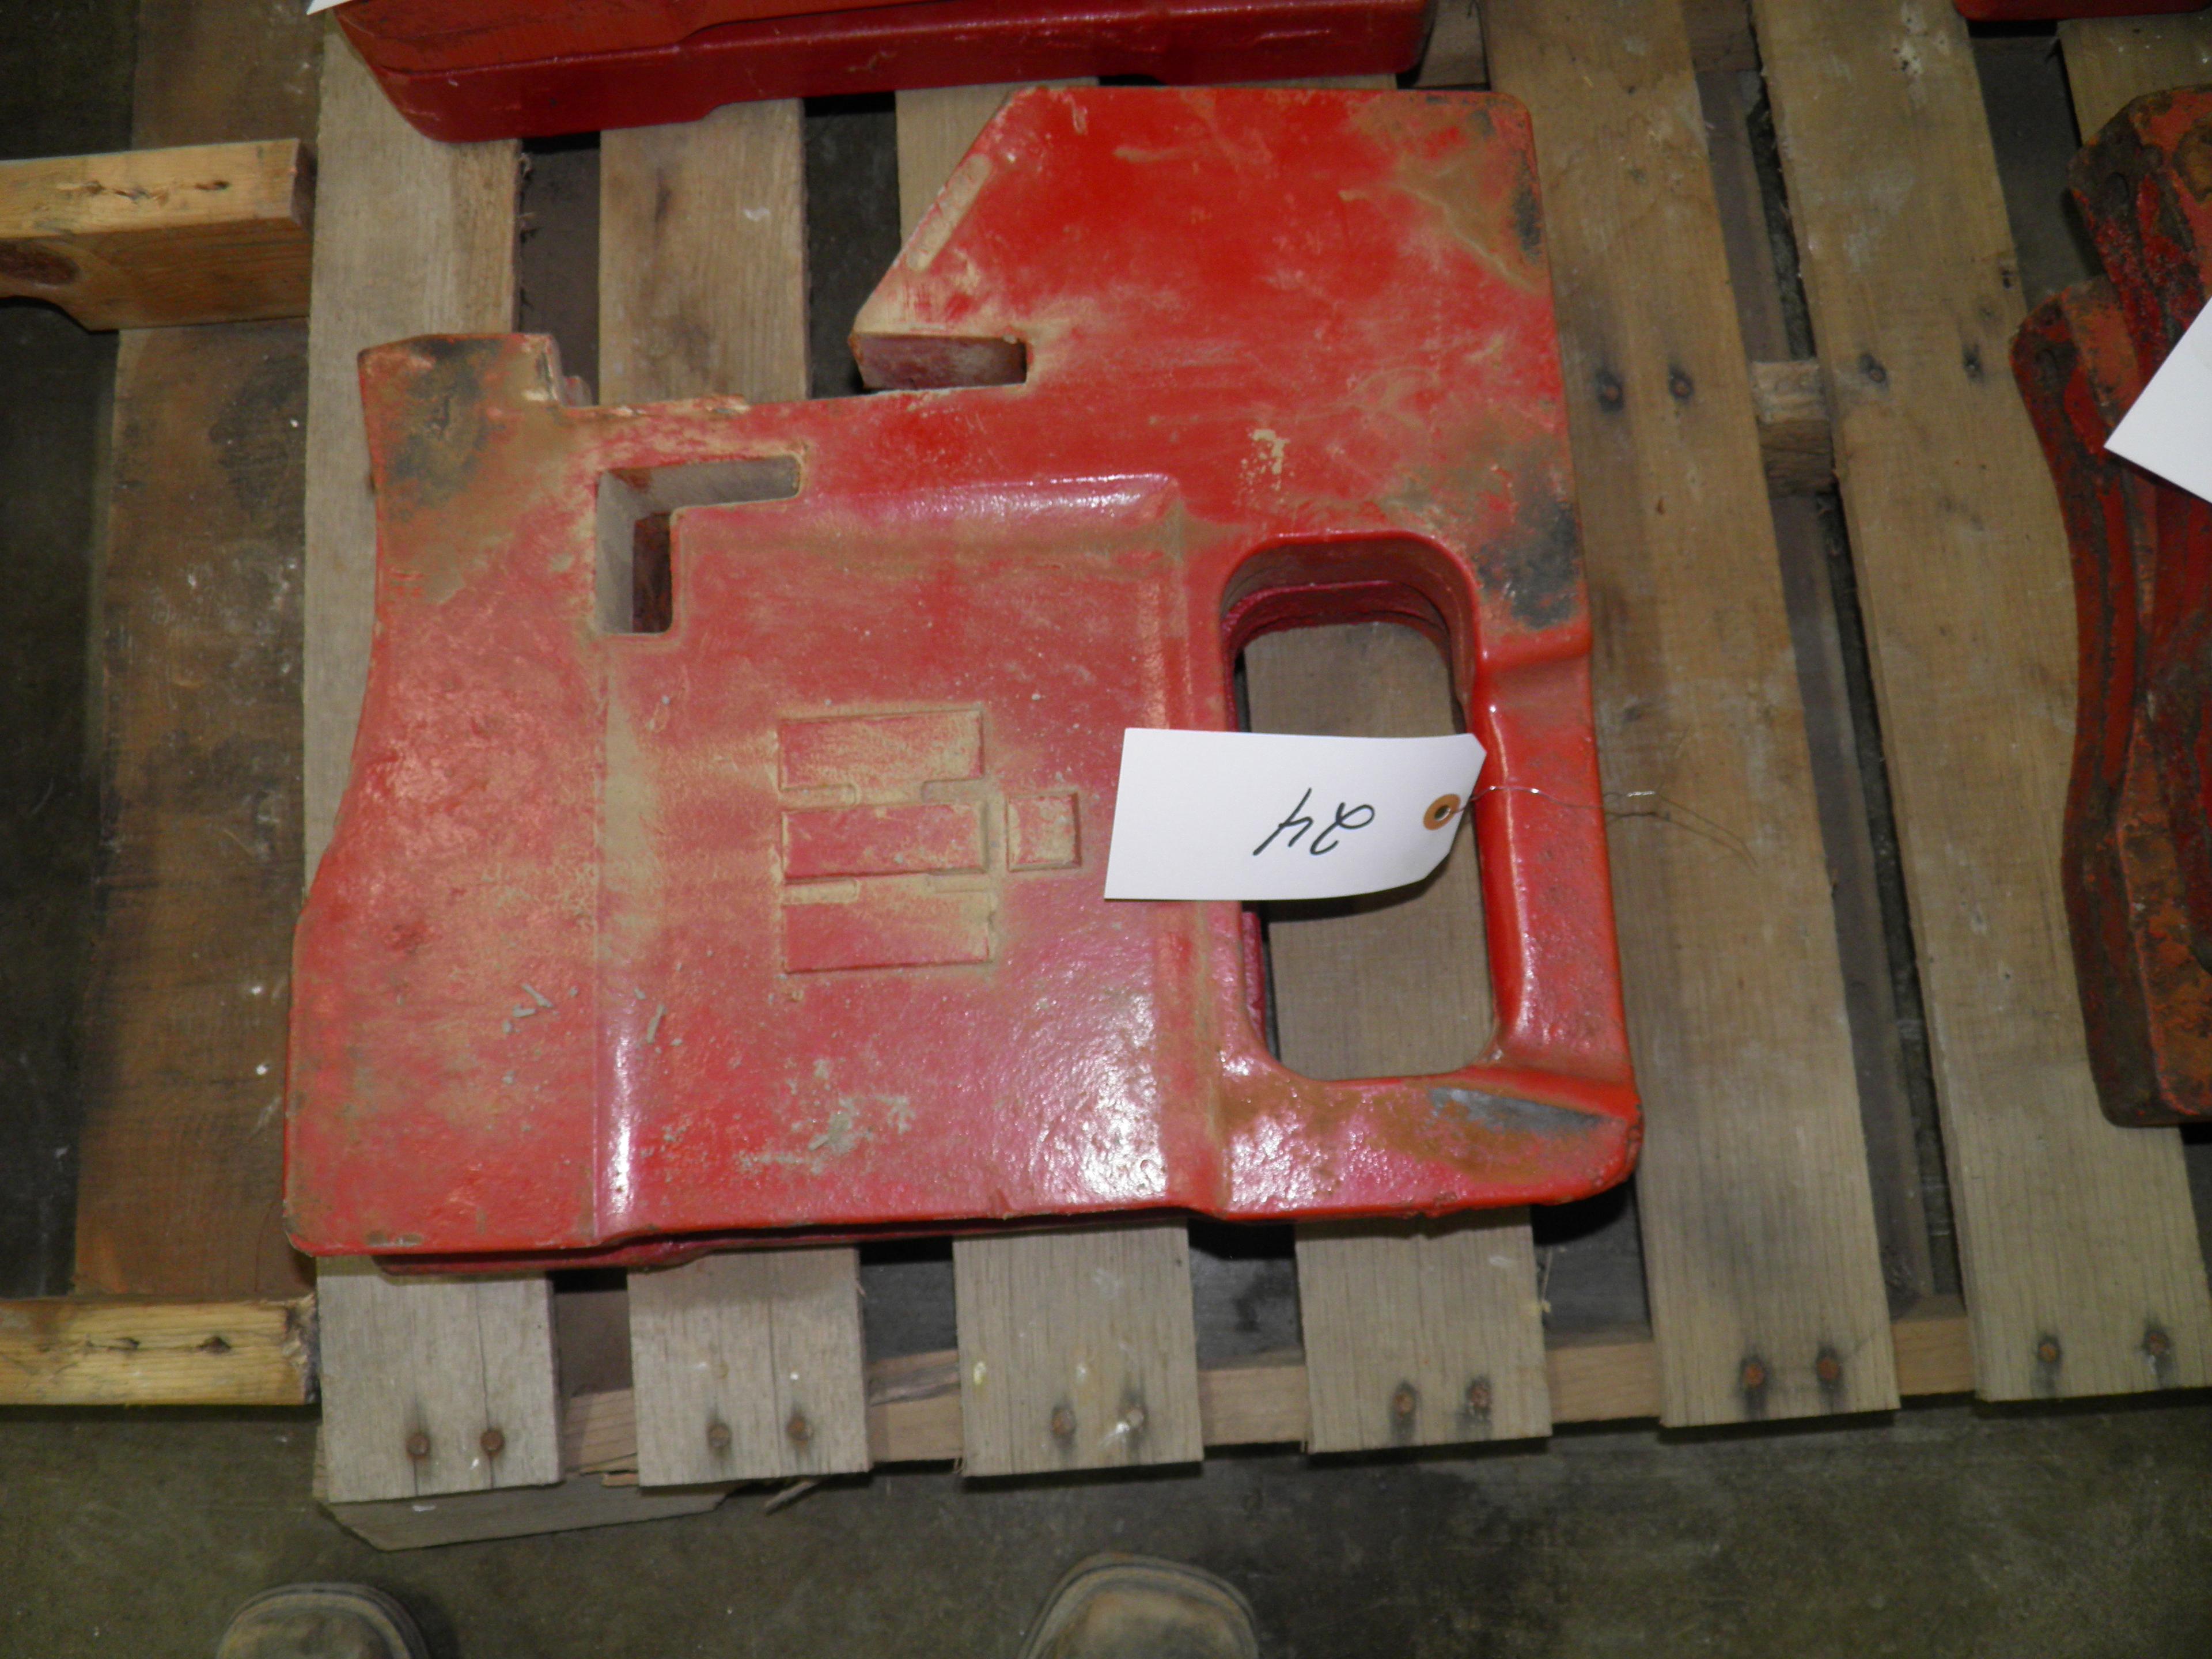 IH front end weights